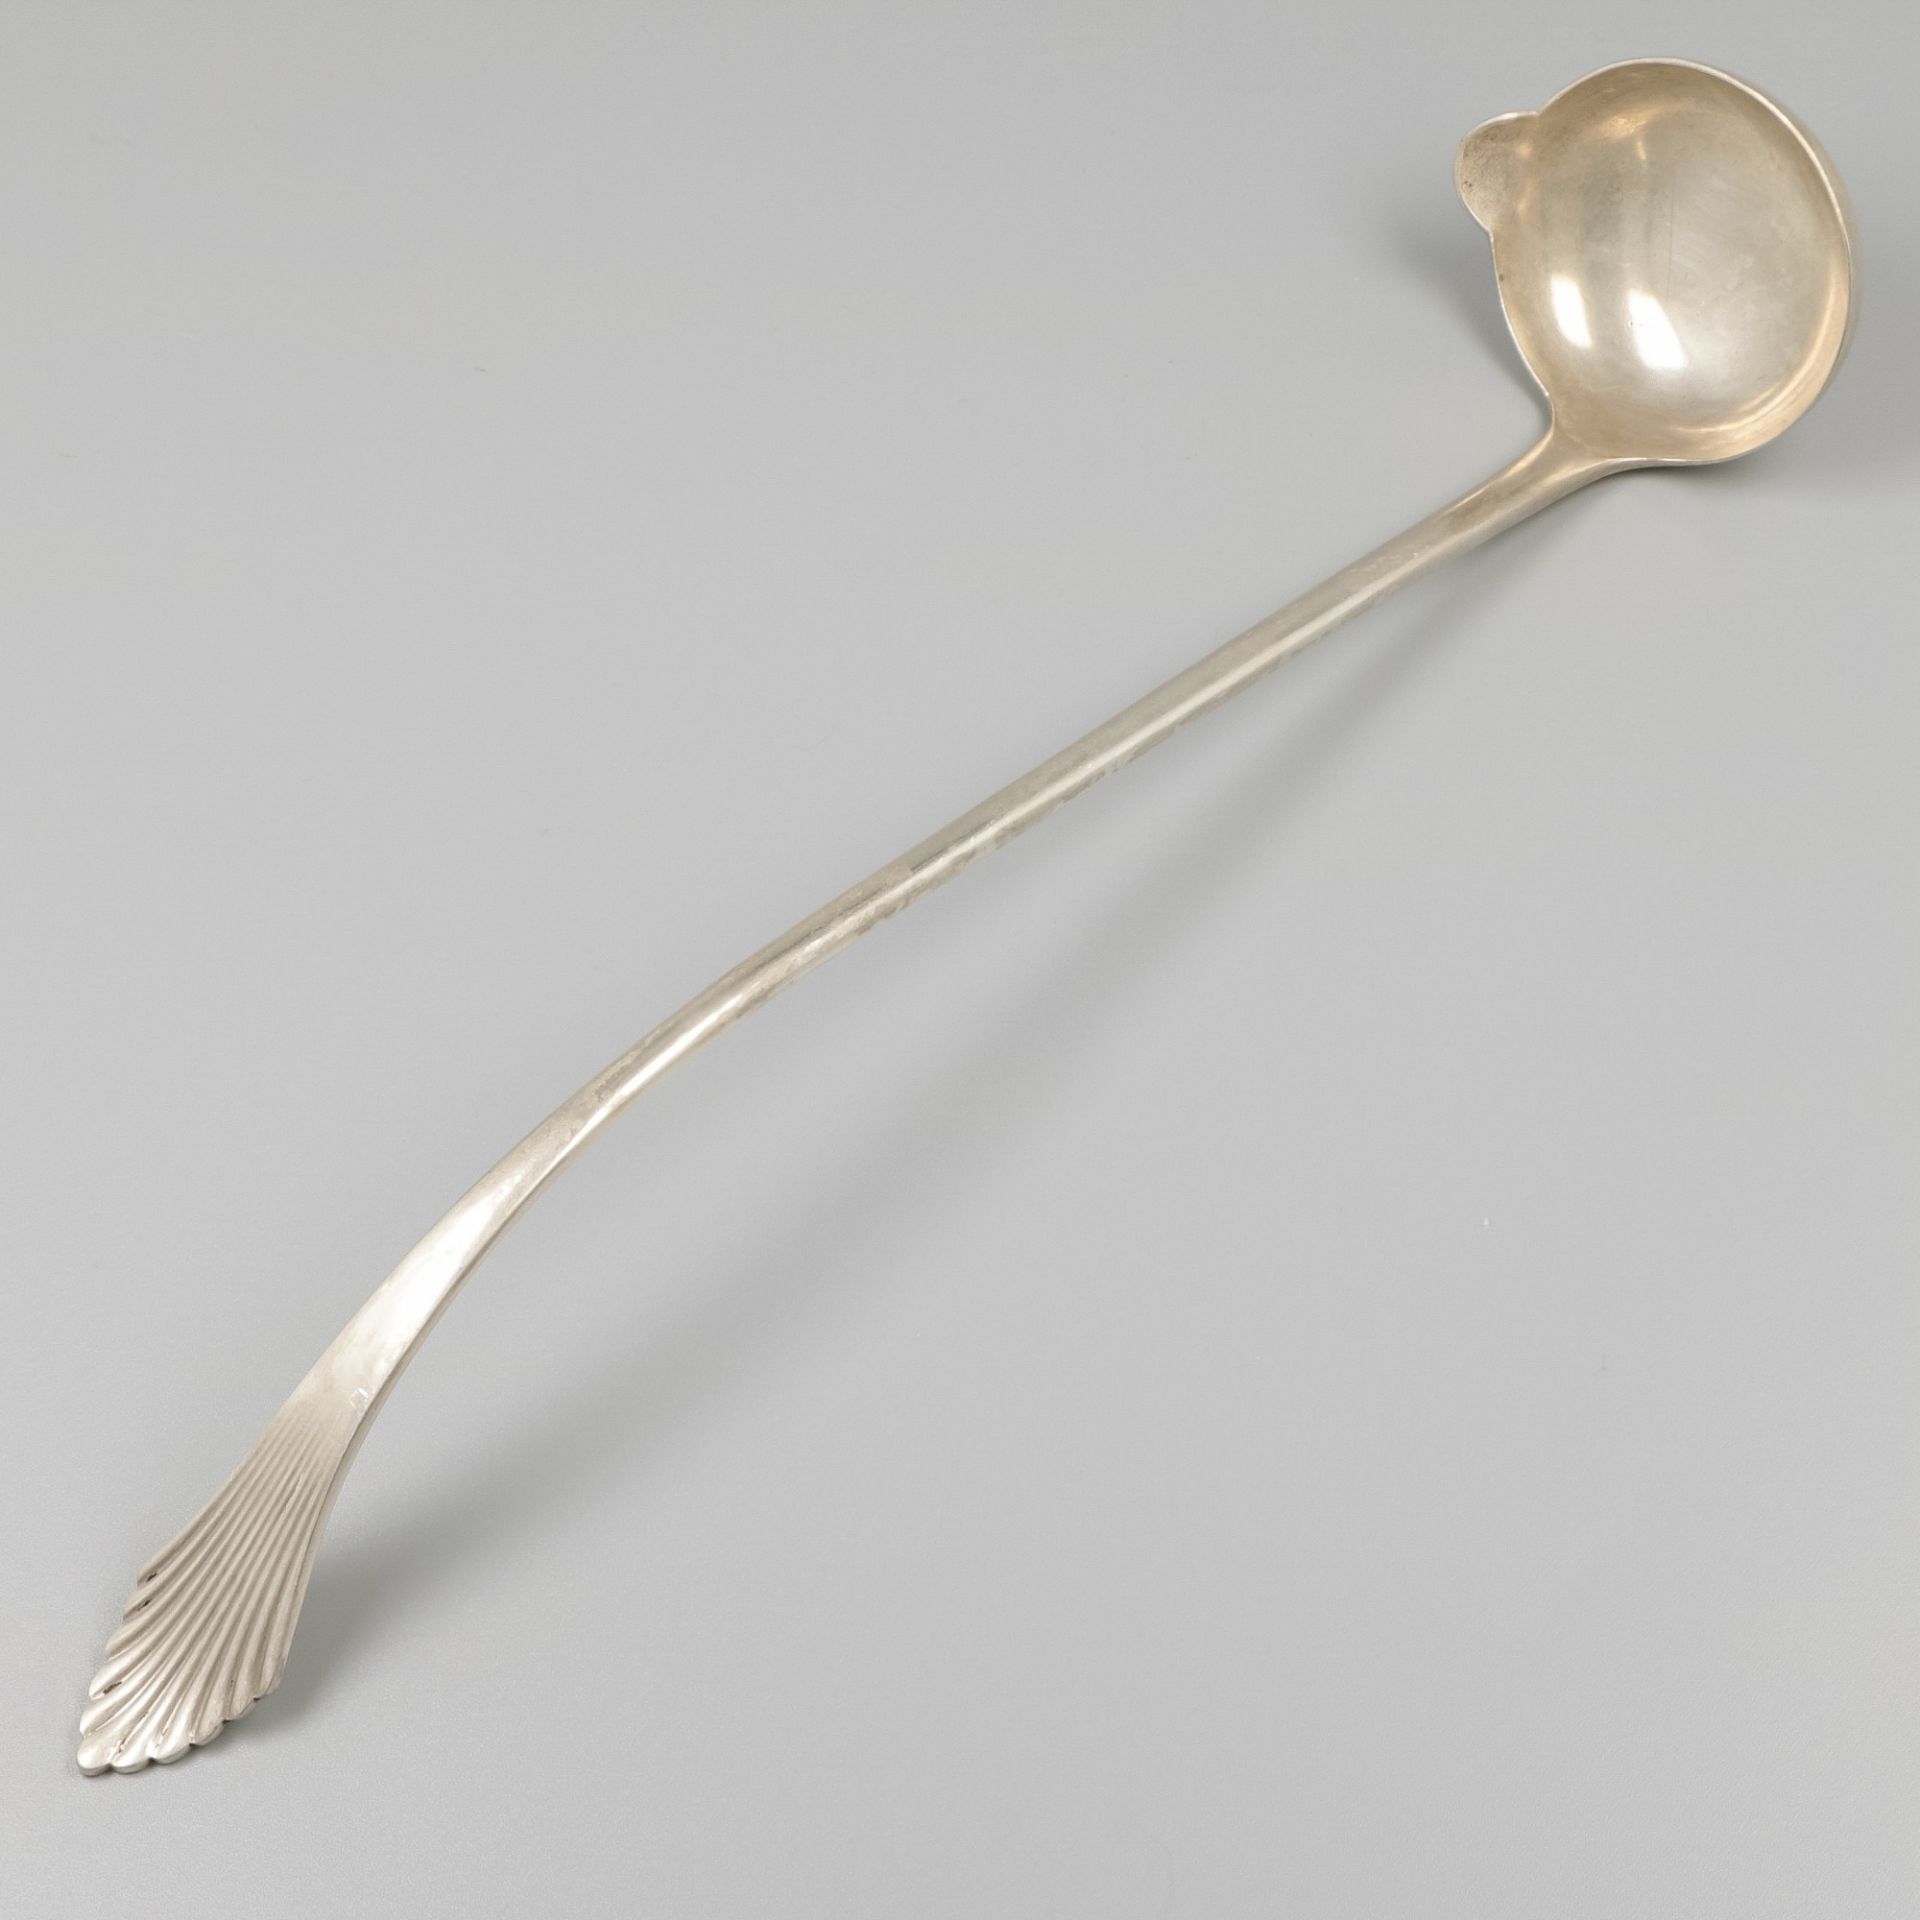 Punchbowl spoon silver.